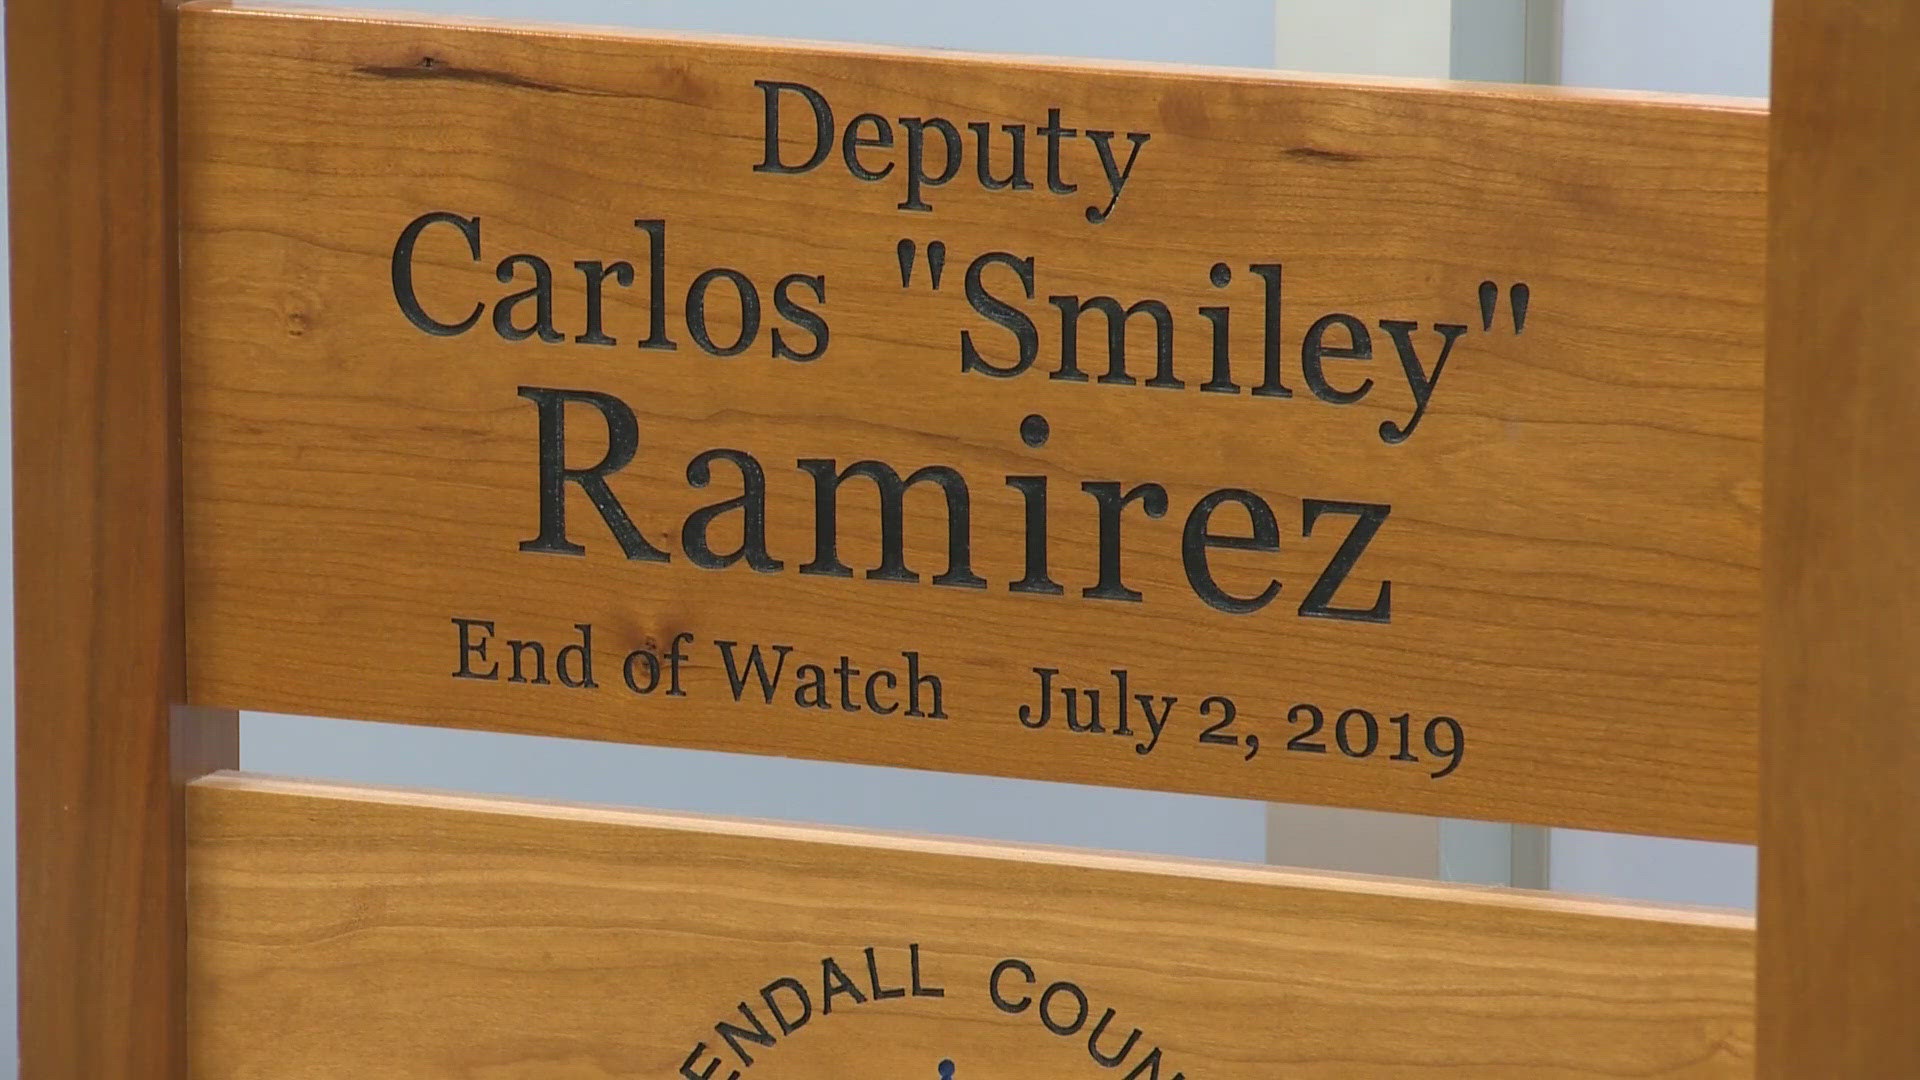 On July 2, 2019 deputy Carlos Ramirez was hit and killed when a young driver fell asleep behind the wheel as Ramirez was making a traffic stop.